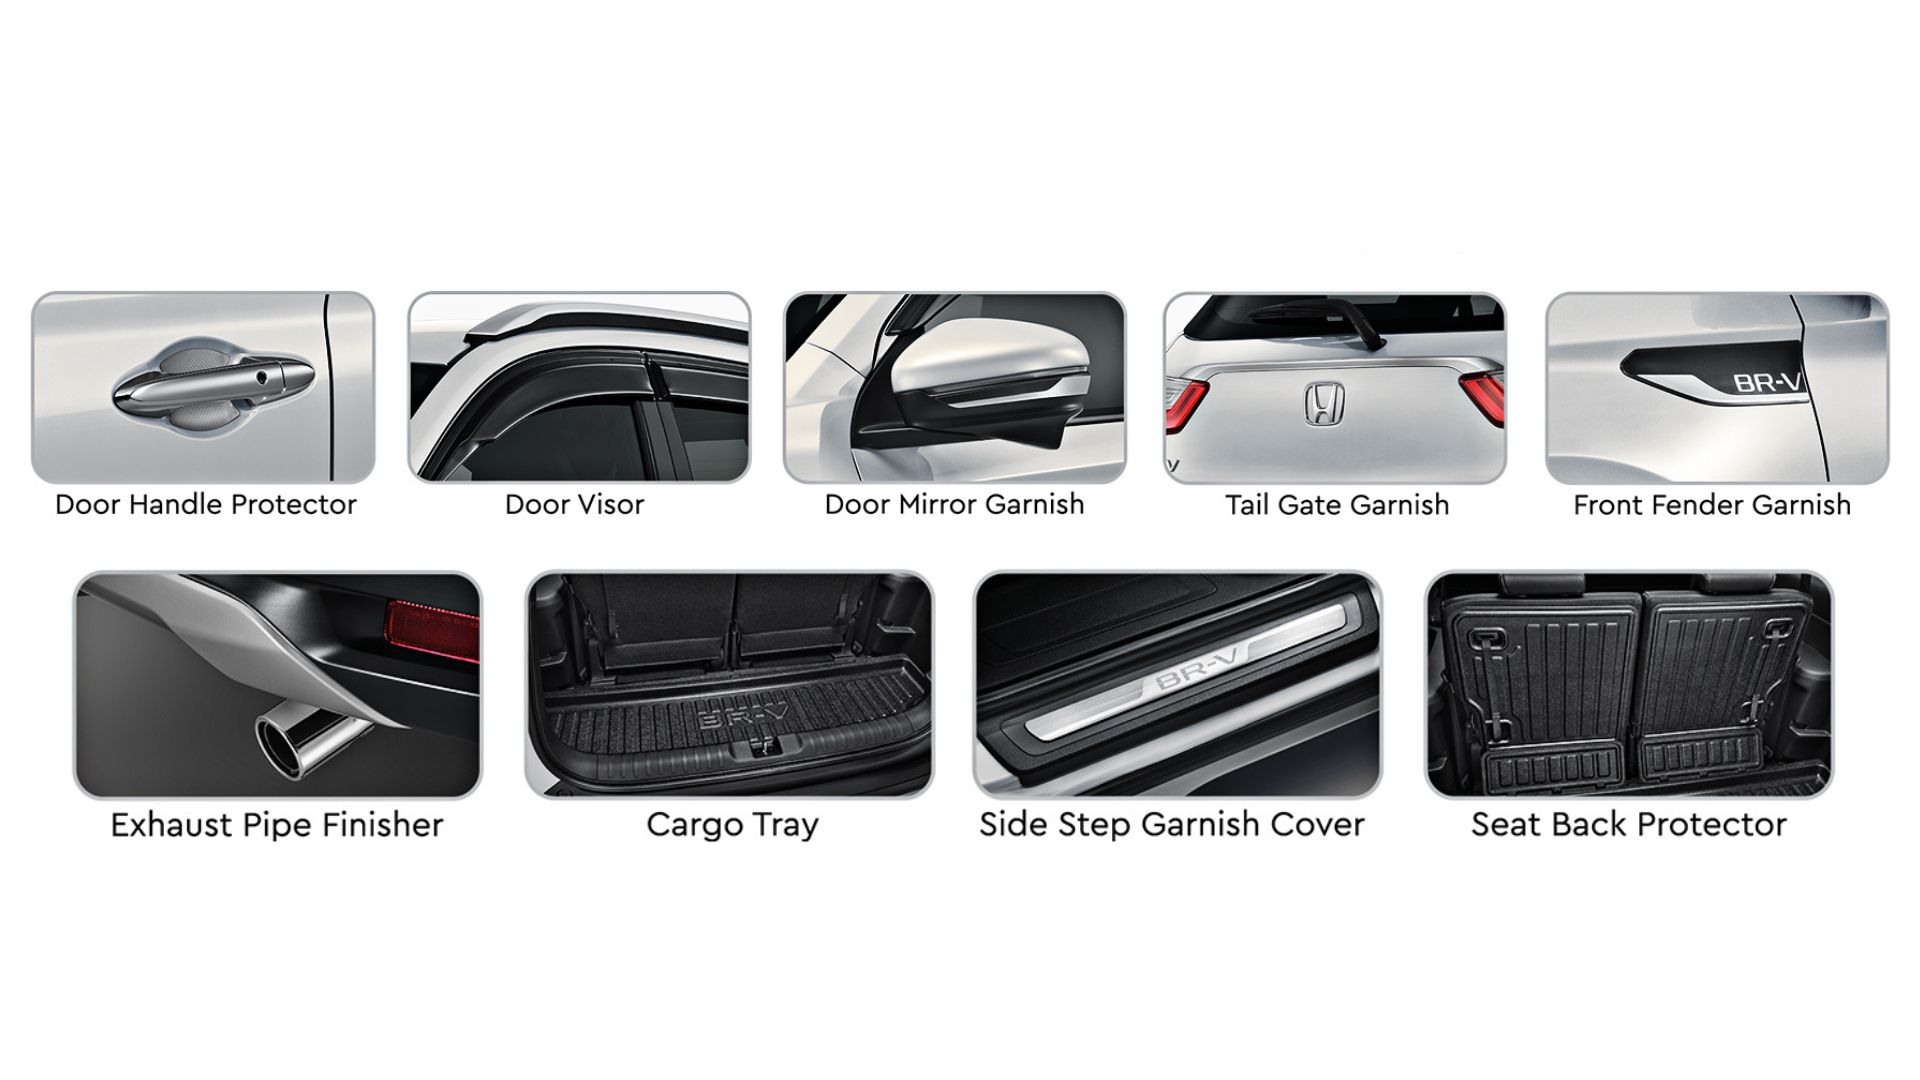 Honda Cars Philippines › Spruce up your All-New BR-V with Honda Genuine  Accessories